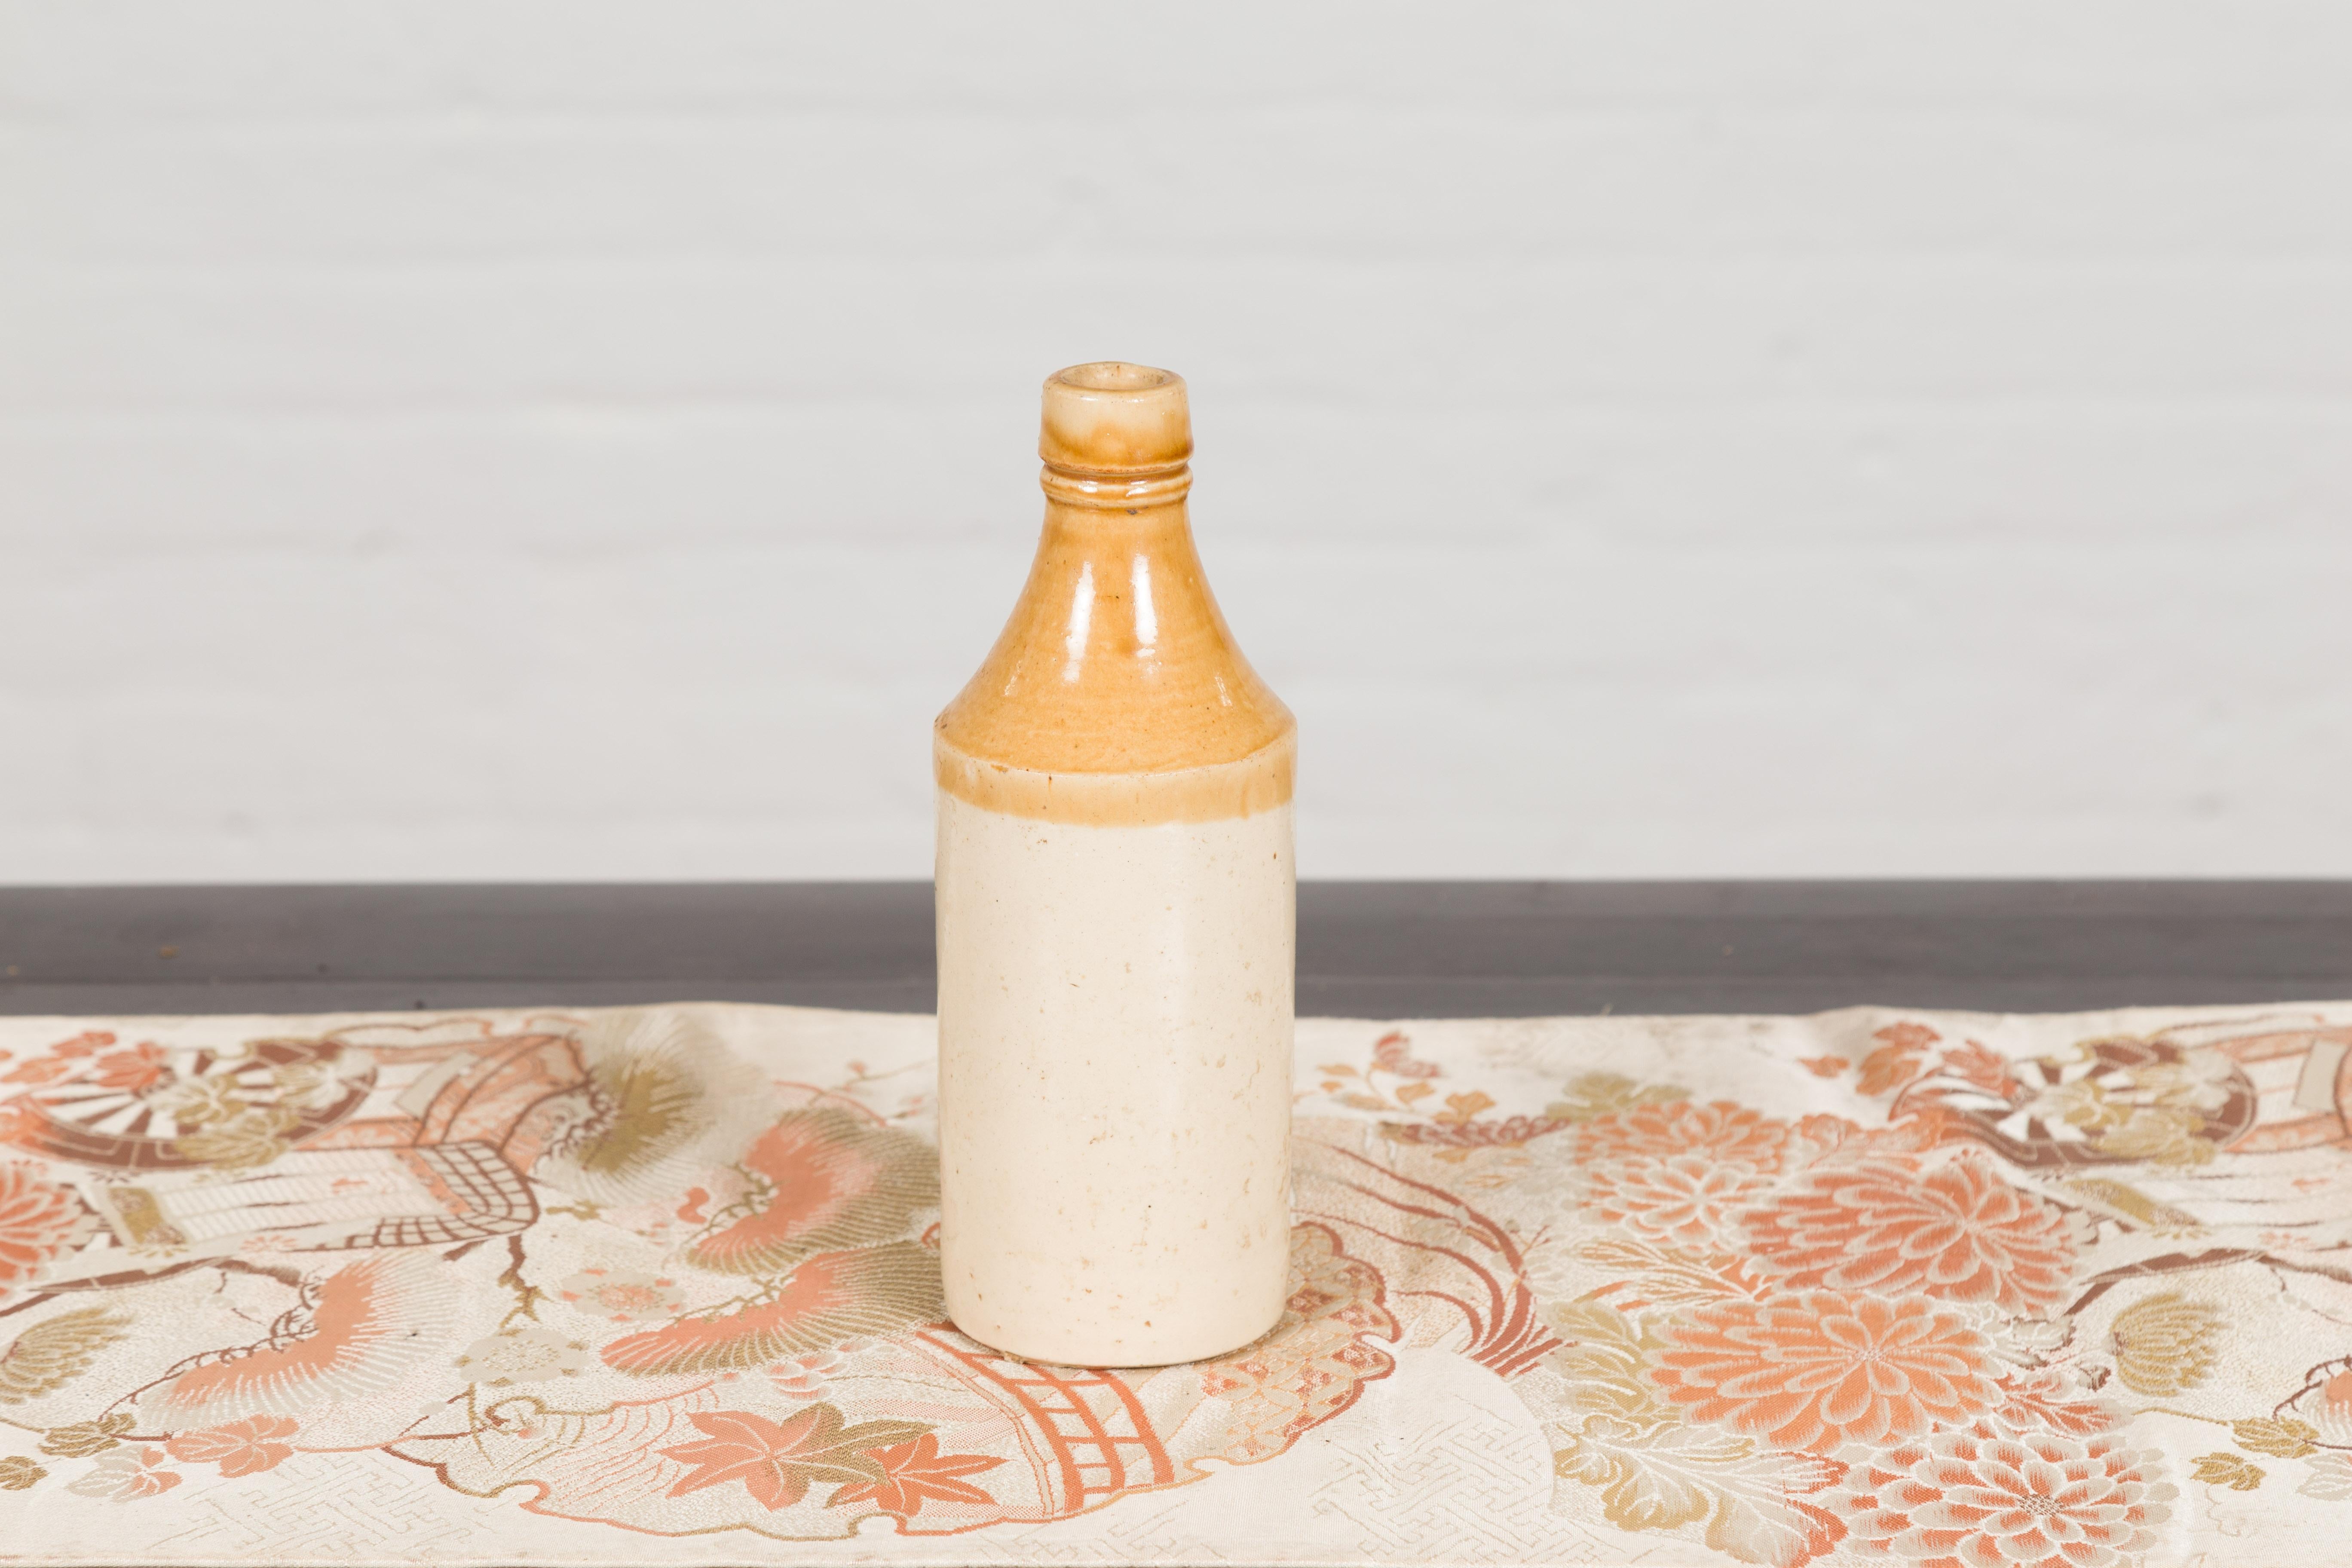 Glazed Vintage Chinese Ceramic Flask with Yellow and Cream Glaze, Several Available For Sale